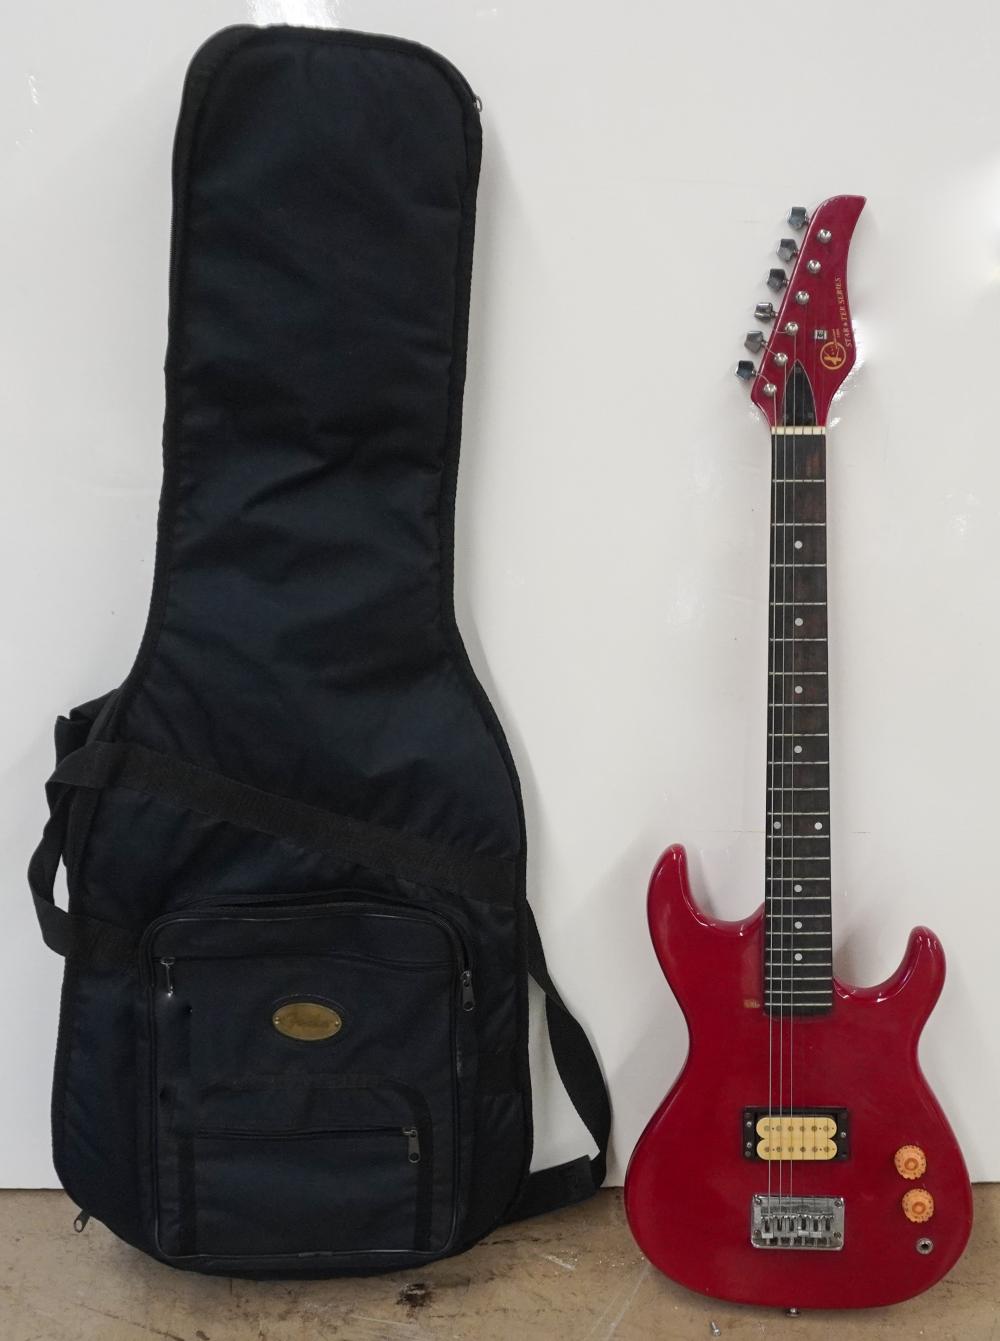 KAY ELECTRIC GUITAR WITH CARRYING CASEKay